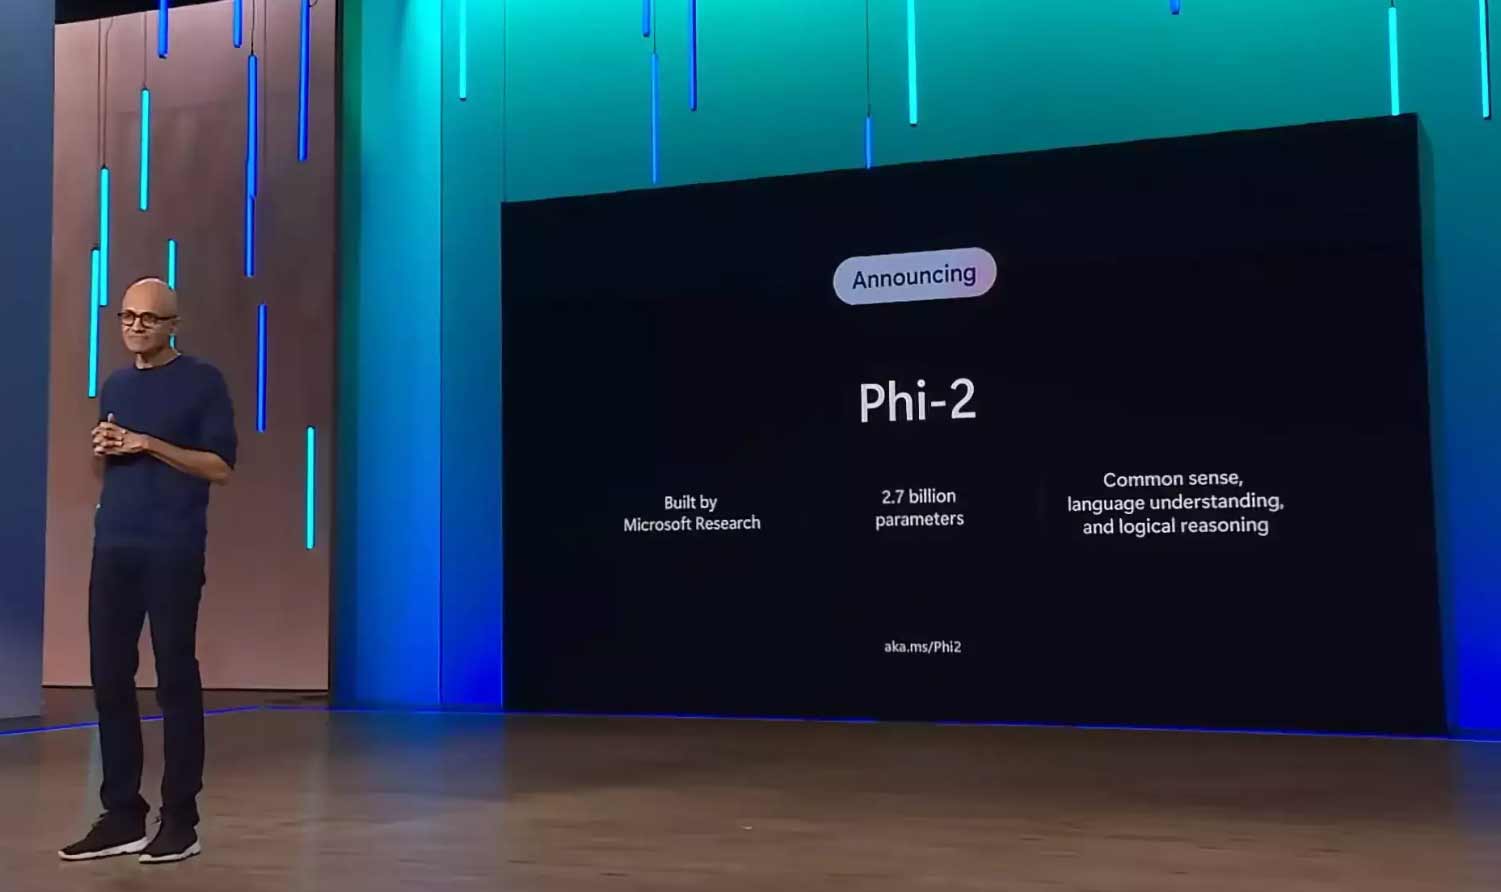 Microsoft Unveils Phi-2, a Small Language Model Which Can Operate on Mobiles & Laptops